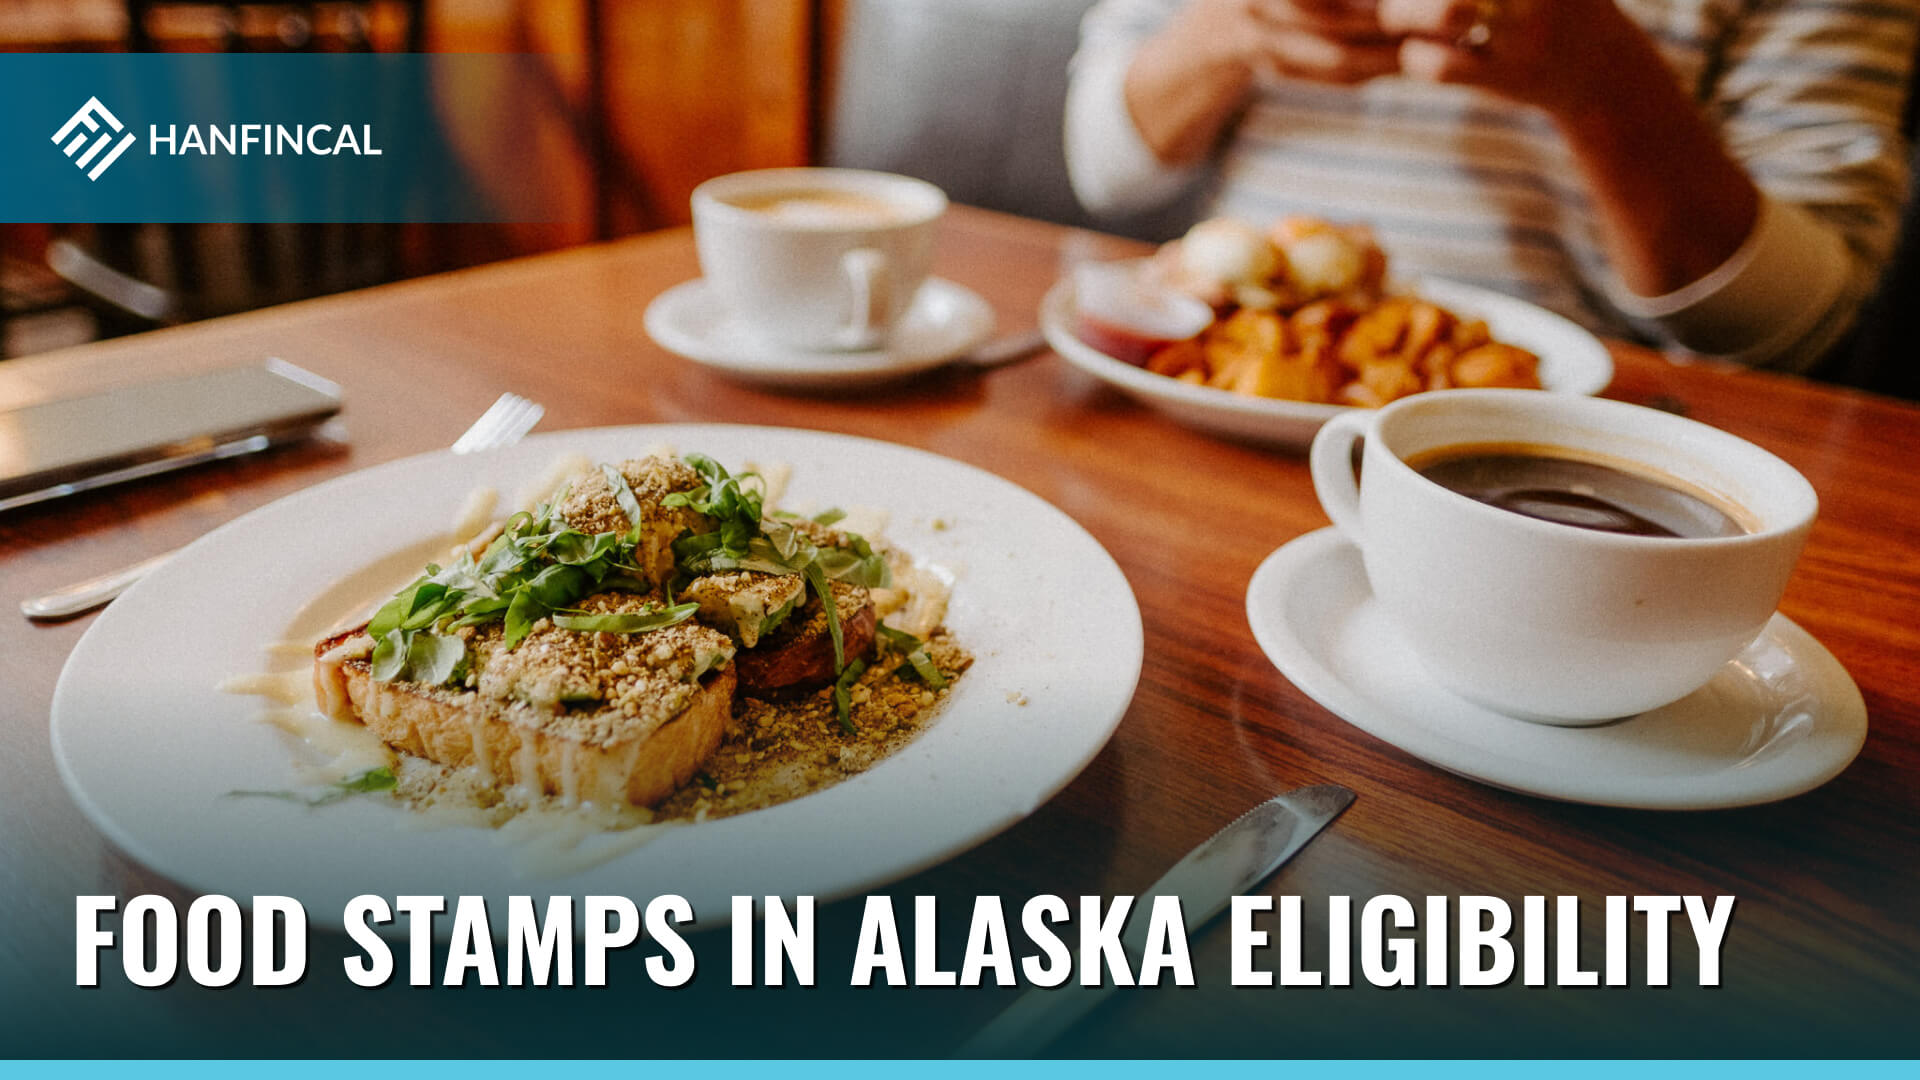 Food Stamps in Alaska eligibility